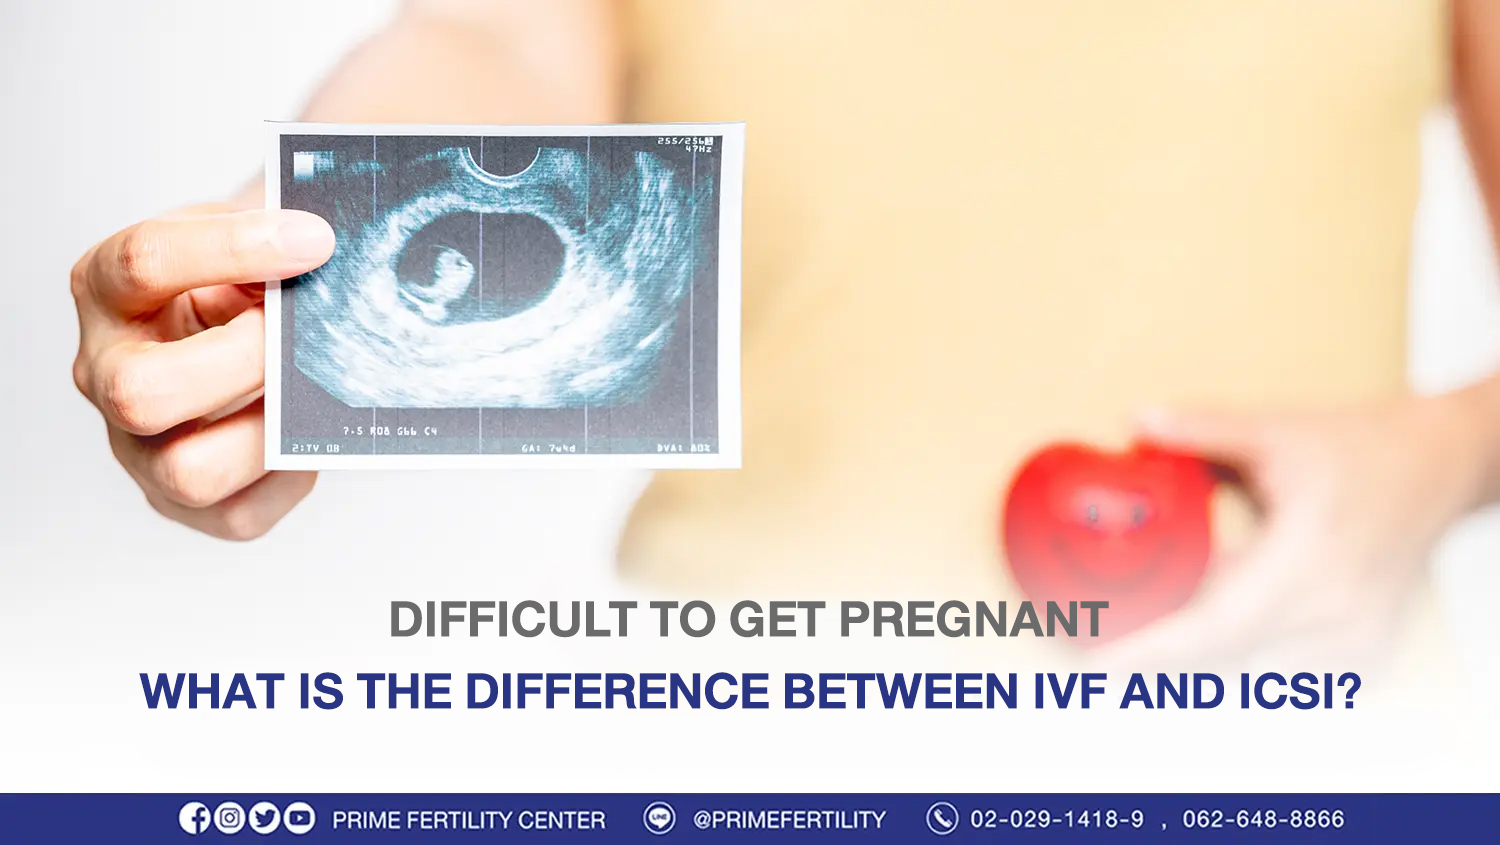 Facing infertility, no matter how hard it is, treat with IVF&ICSI to get pregnant successfully. 